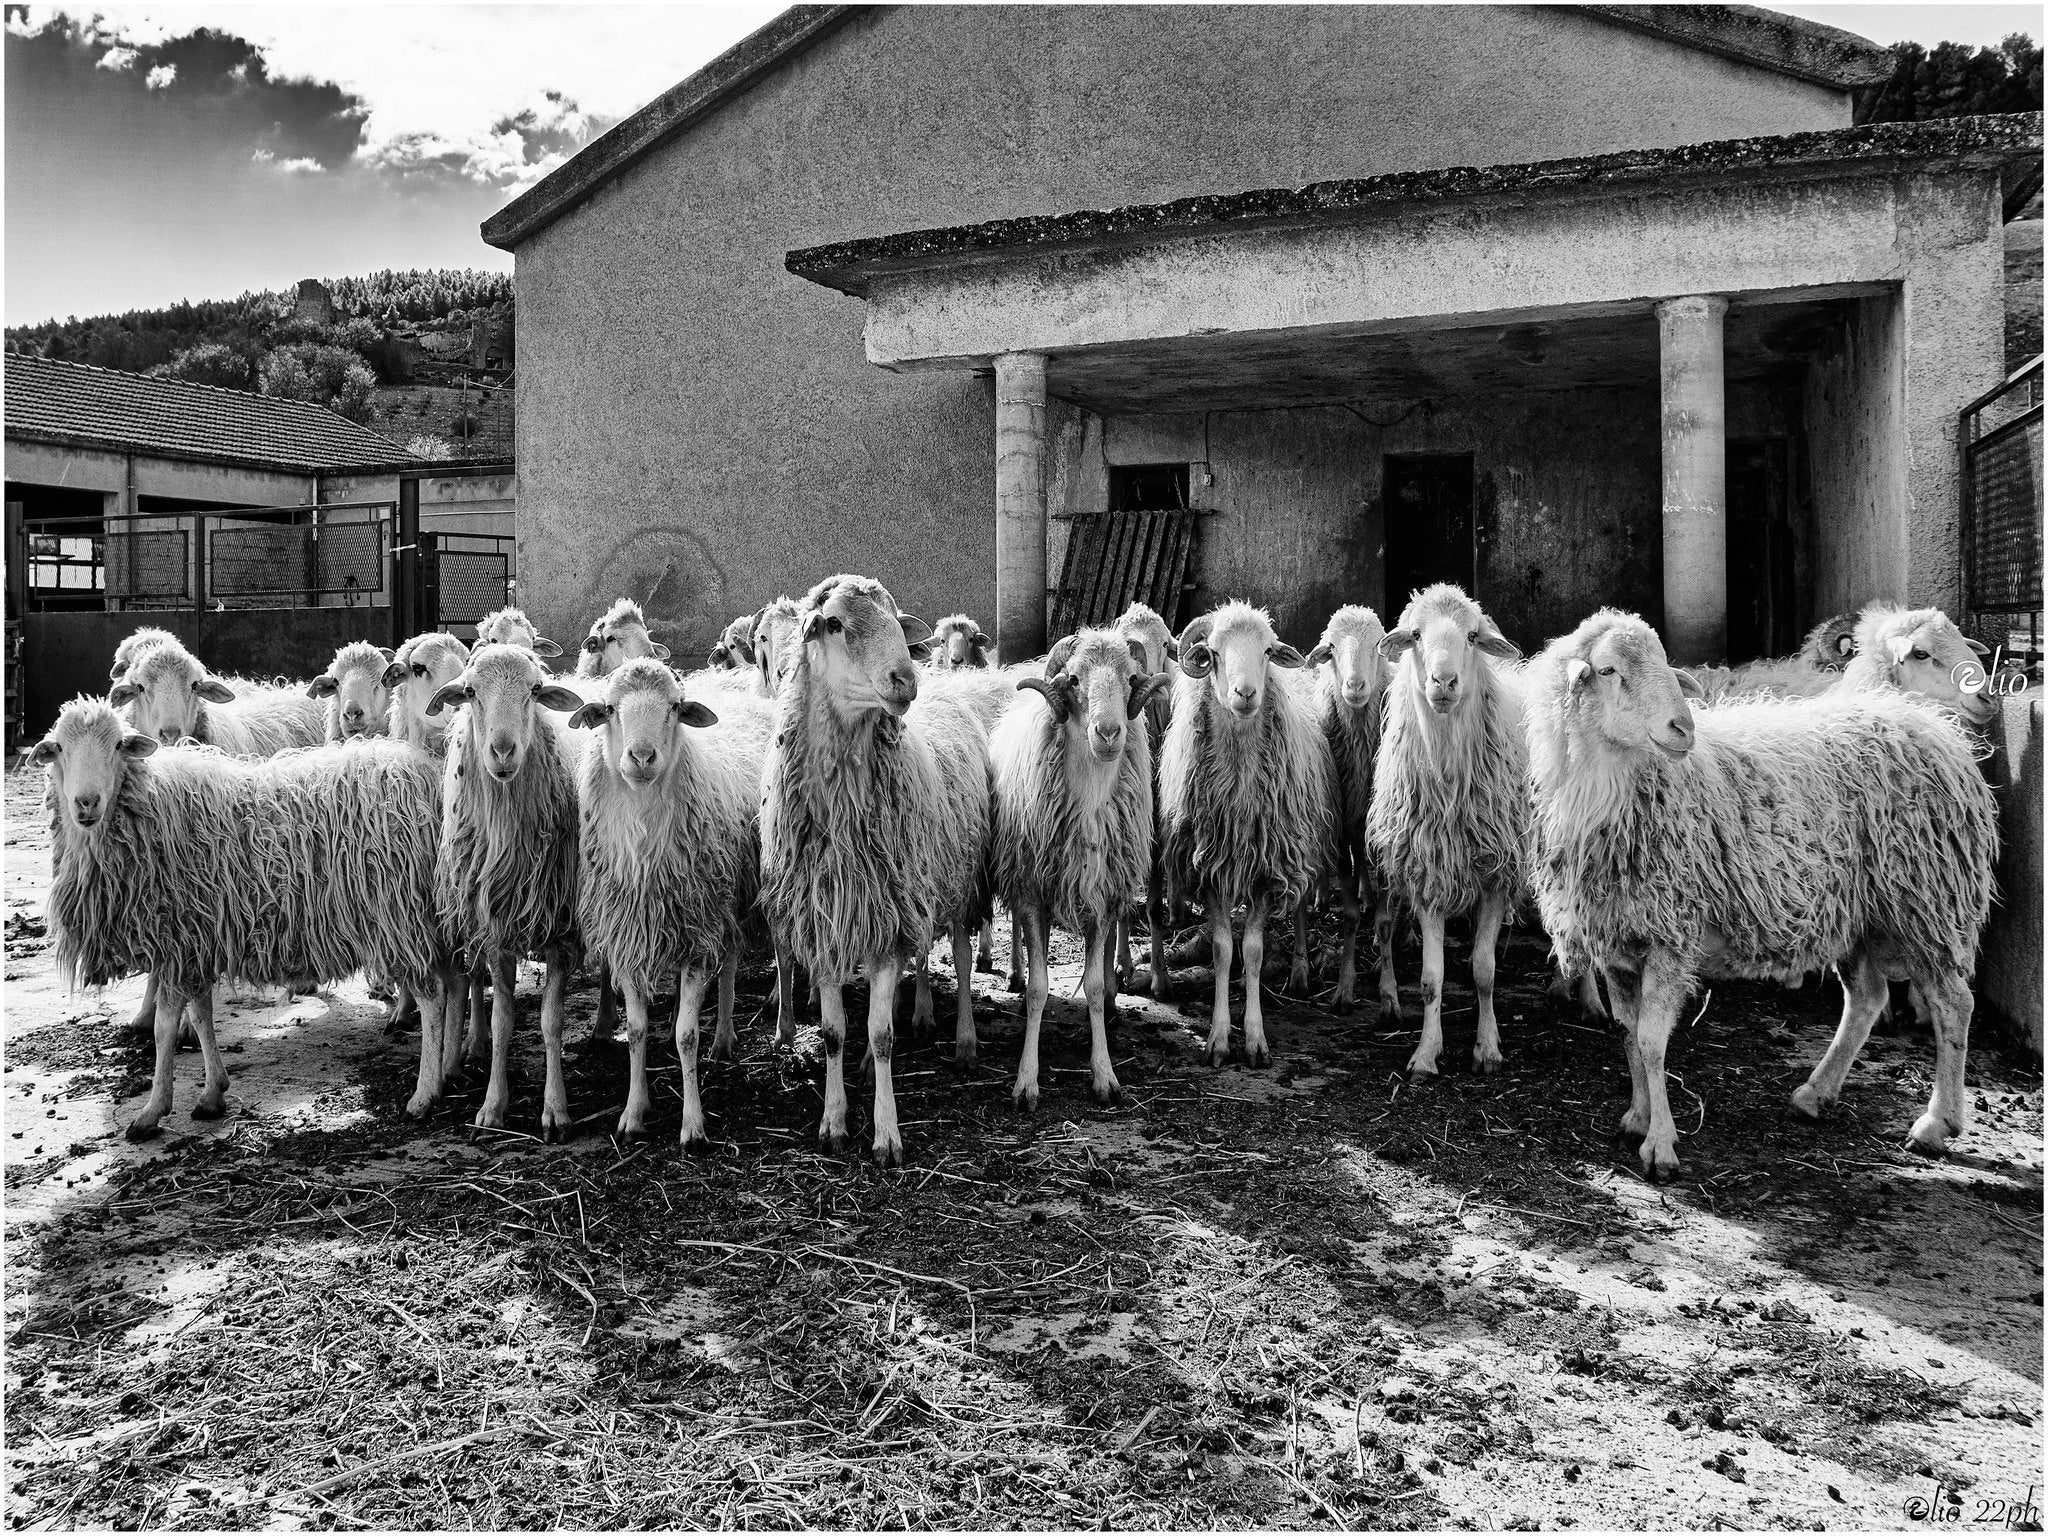 Sicilian sheep in black and white.